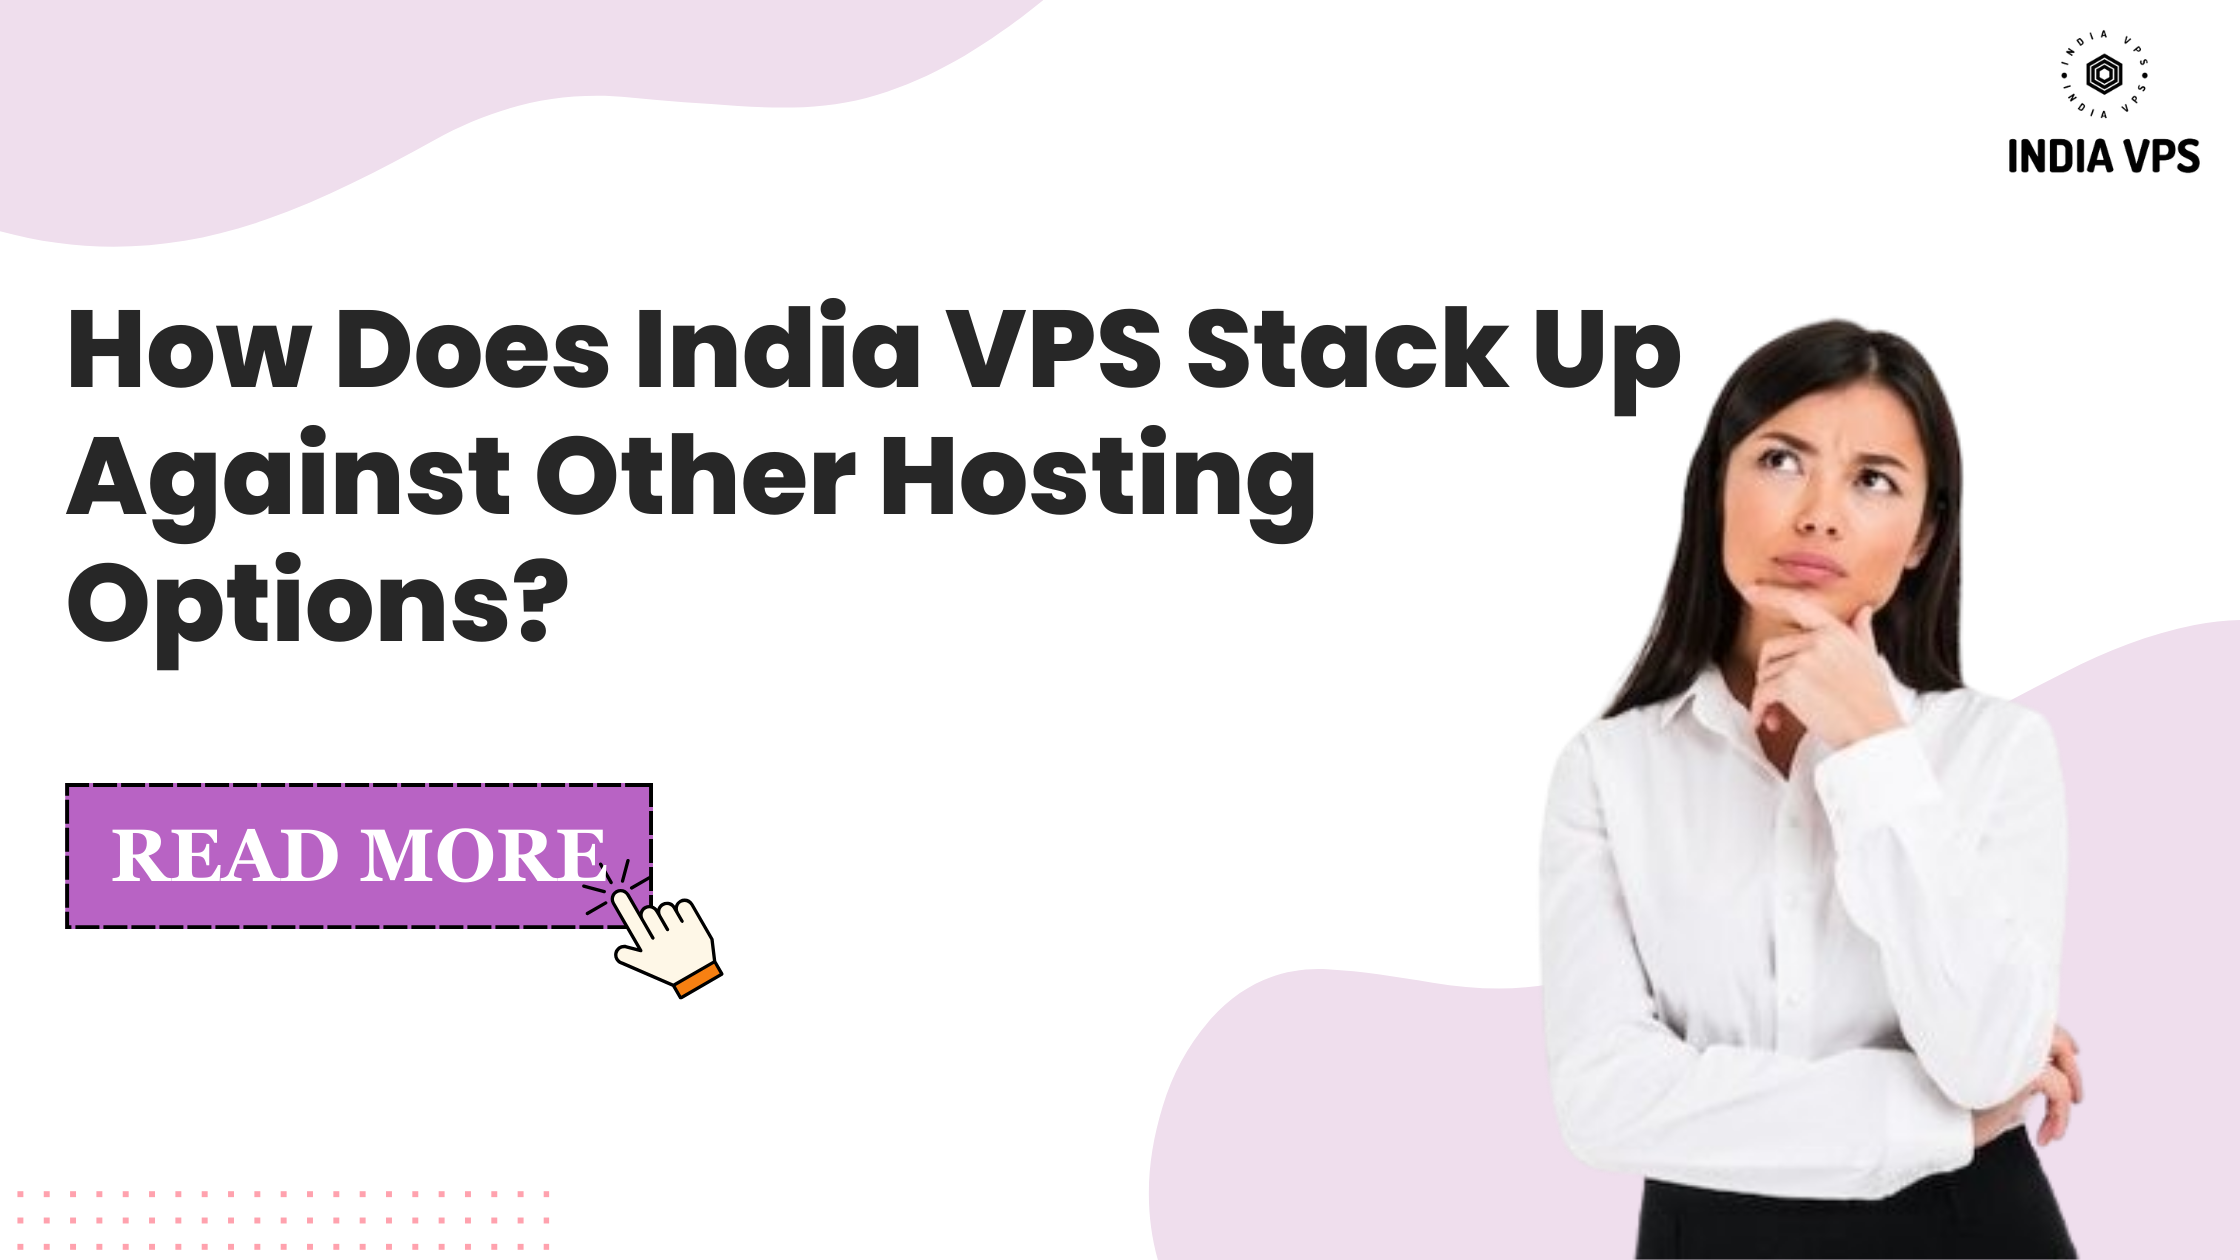 How Does India VPS Stack Up Against Other Hosting Options